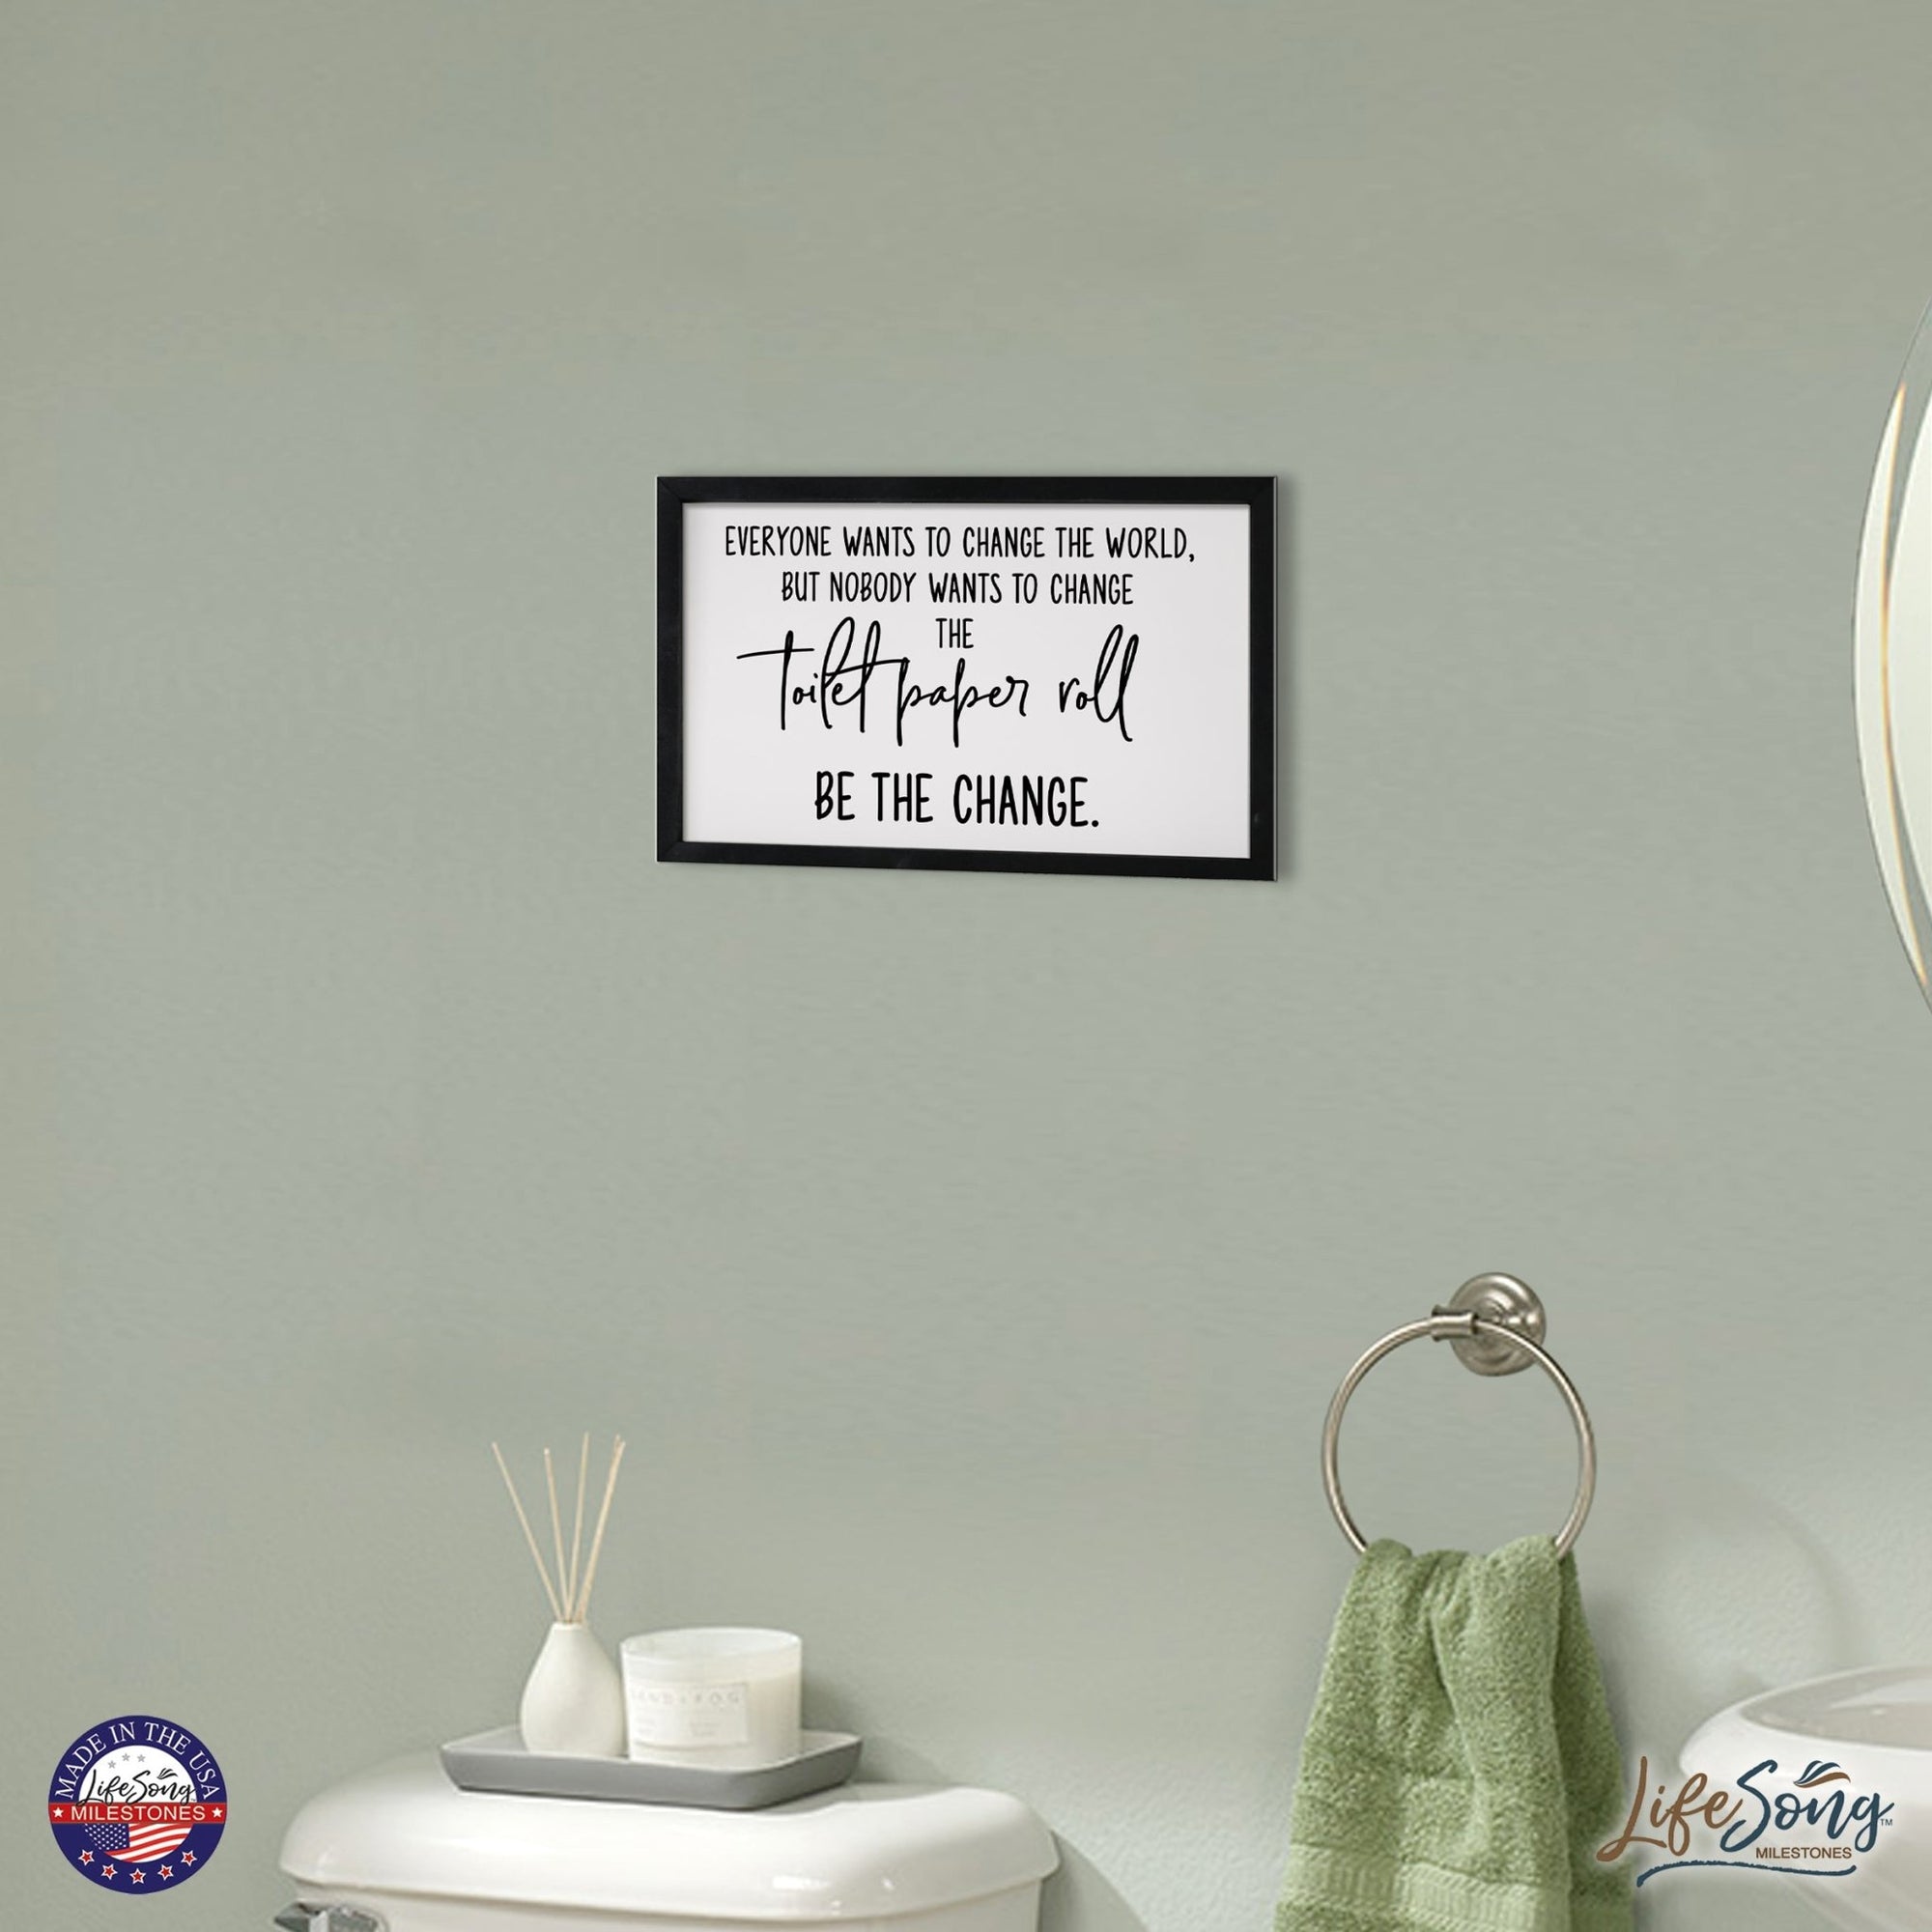 Funny Bathroom Decor Framed Shadow Box 7x10in (Toilet Paper Roll) - LifeSong Milestones